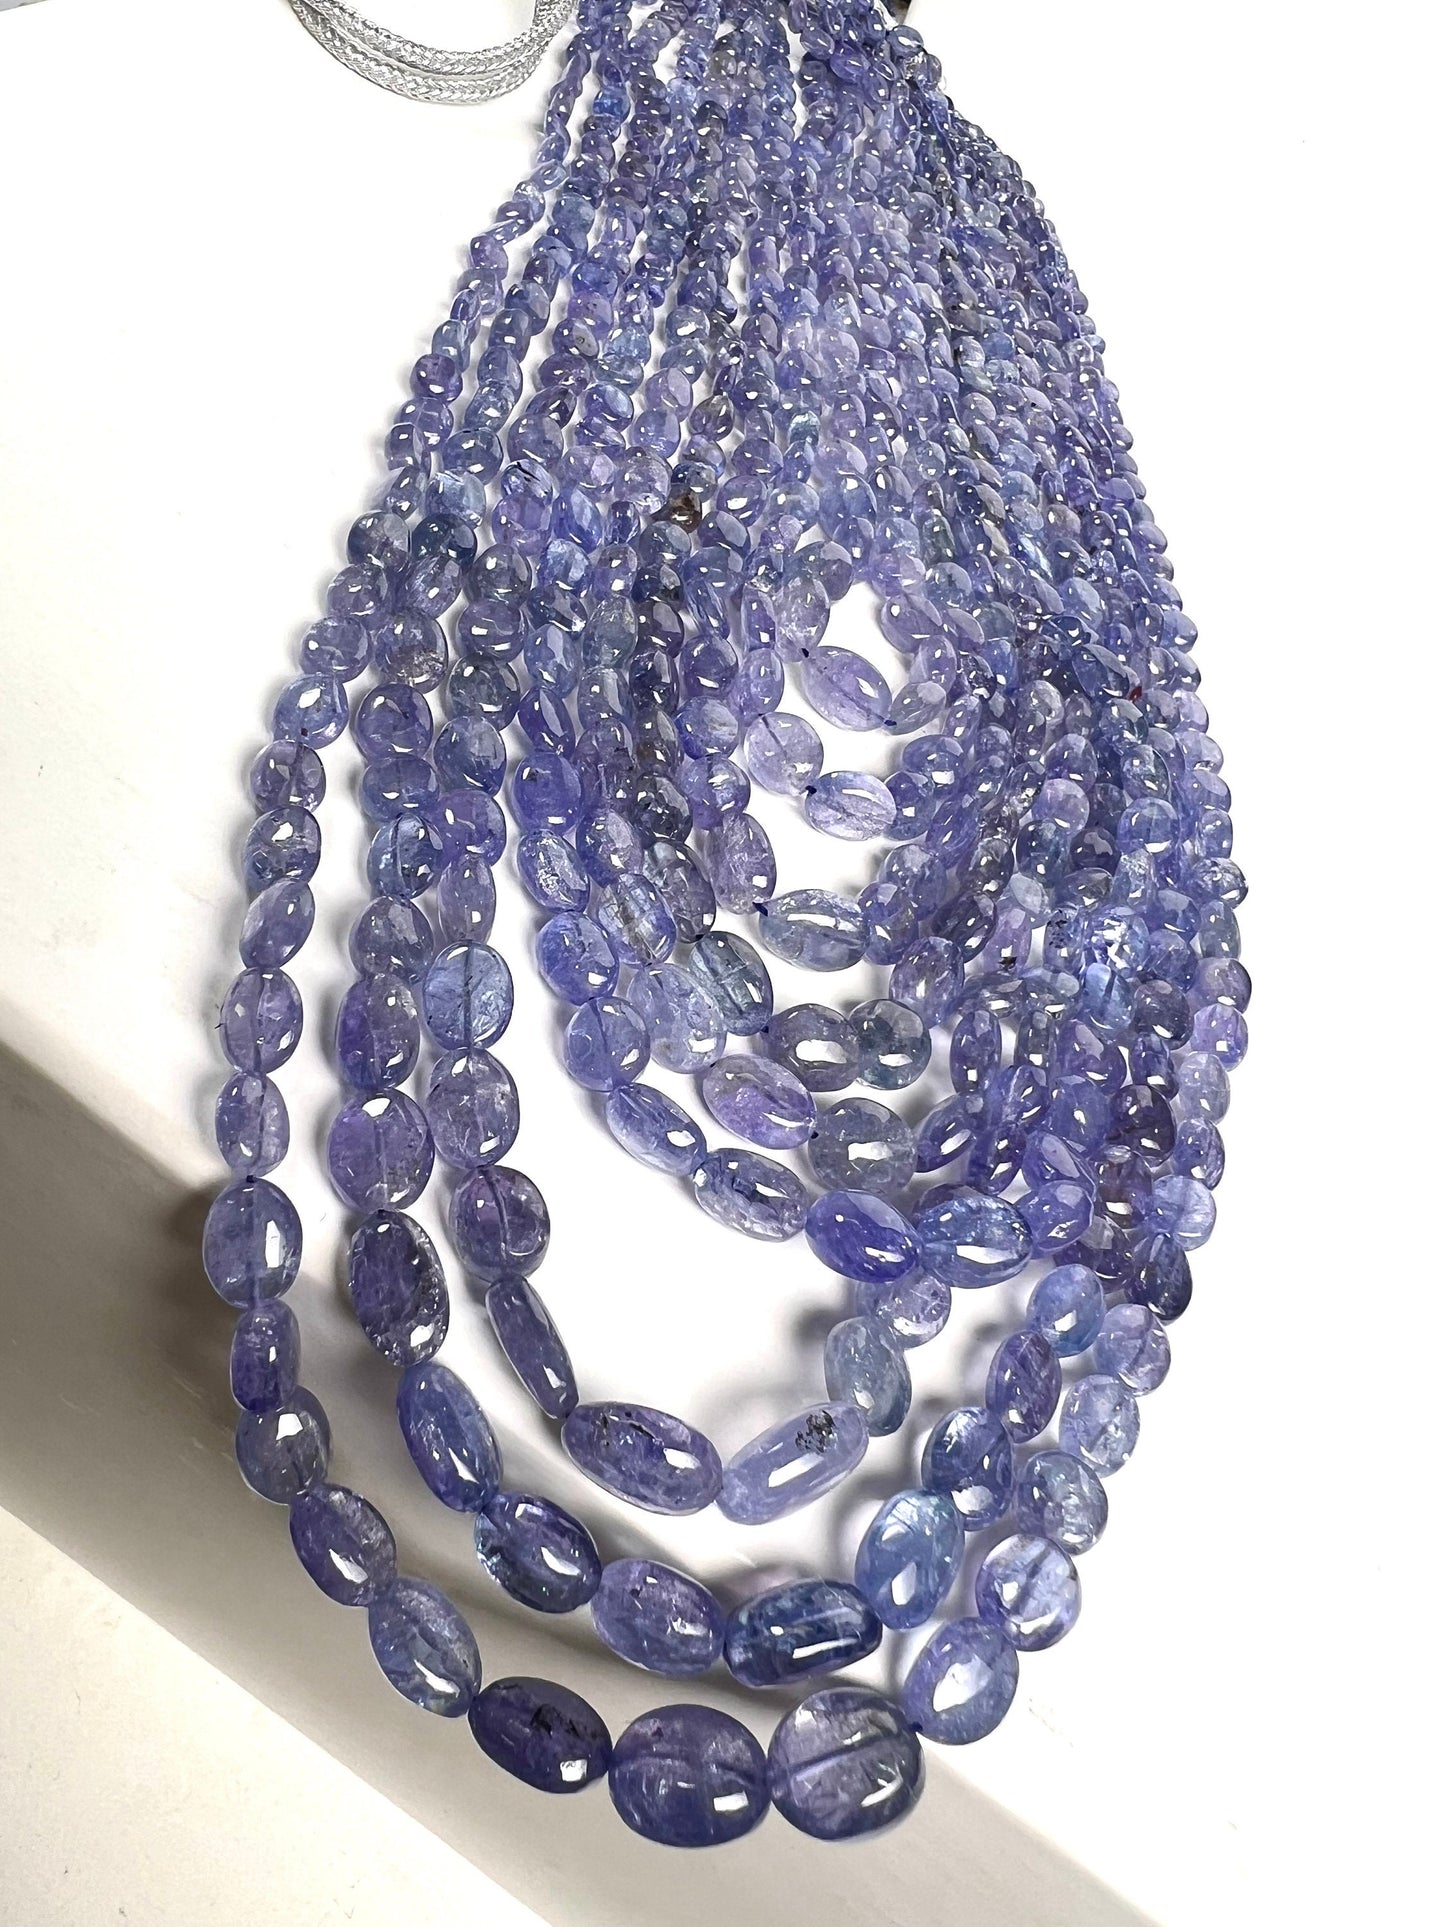 Natural Tanzanite 9 line Smooth Oval 5-10mm Necklace AAA clear quality natural Tanzanite oval bead with long adjustable Thread ,1028 carat